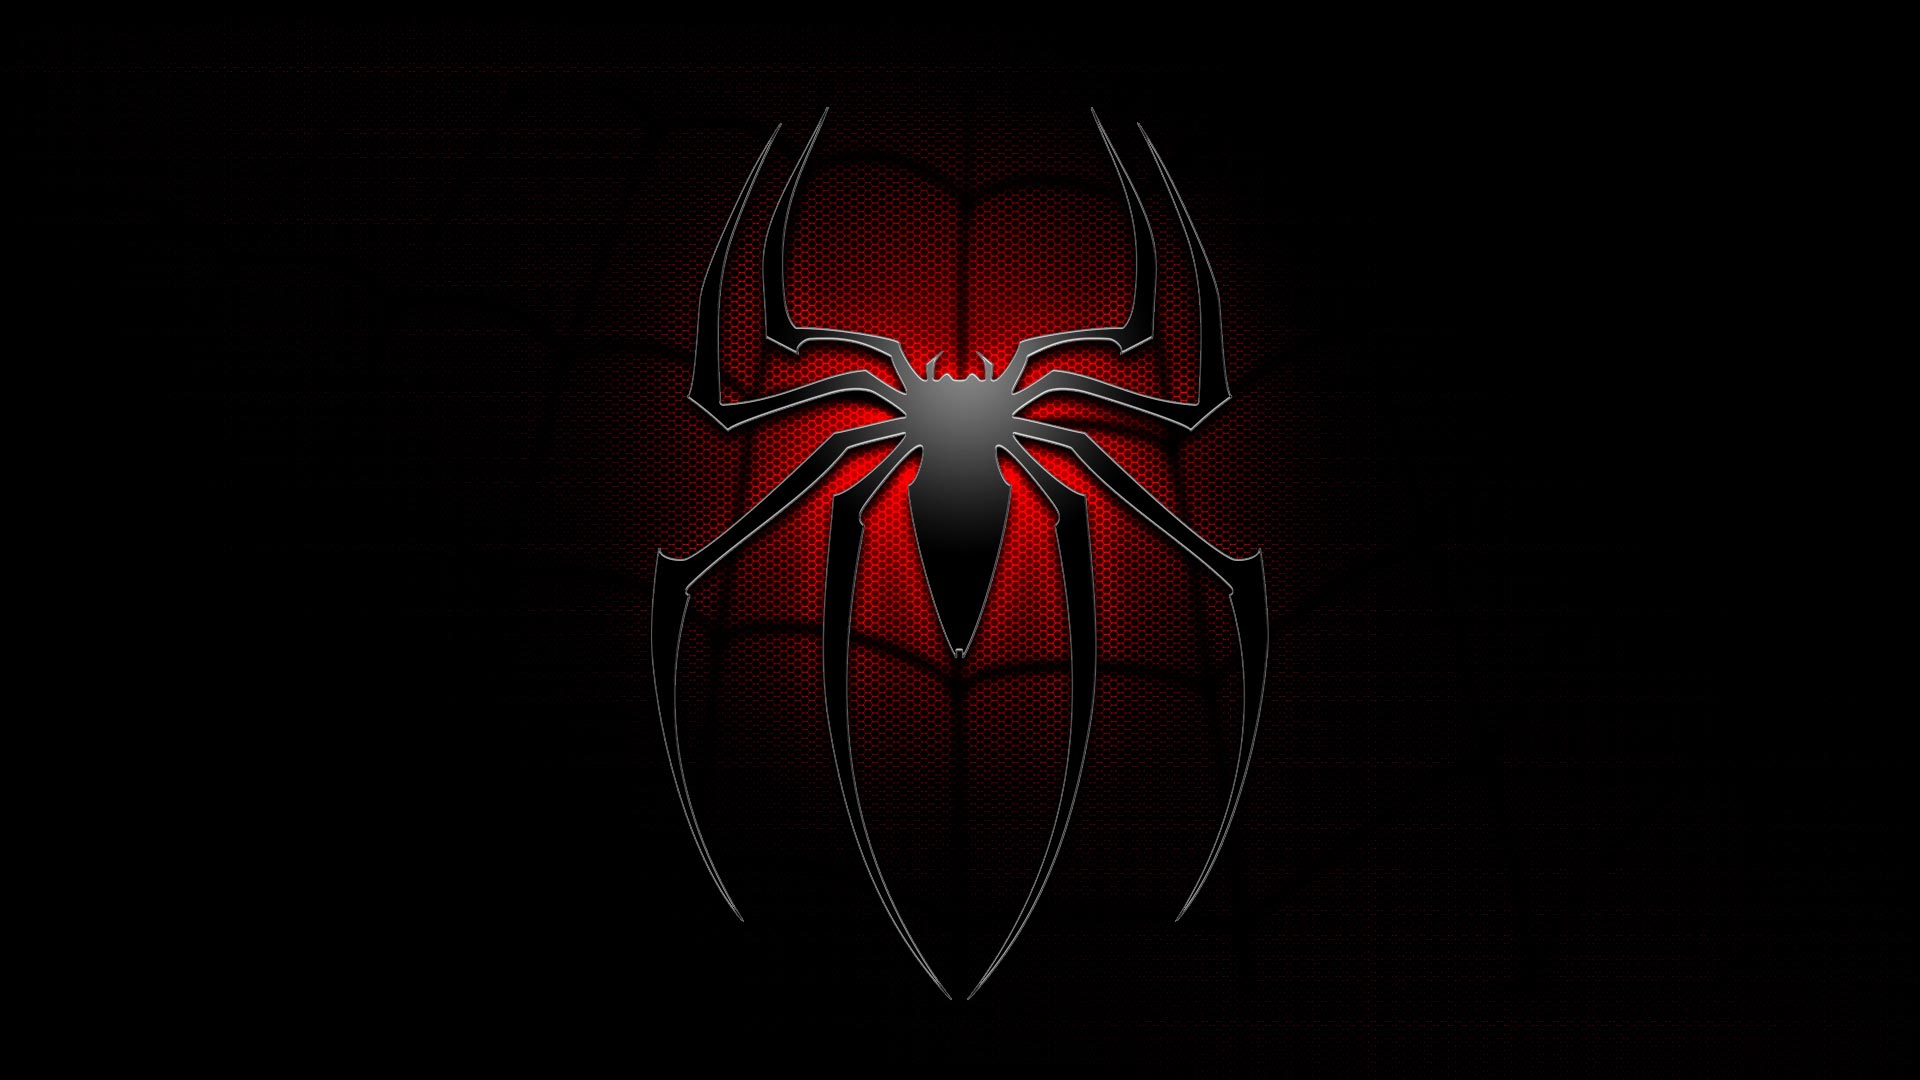 Amazing Spider Man 2 HD Wallpapers Desktop Backgrounds The Amazing